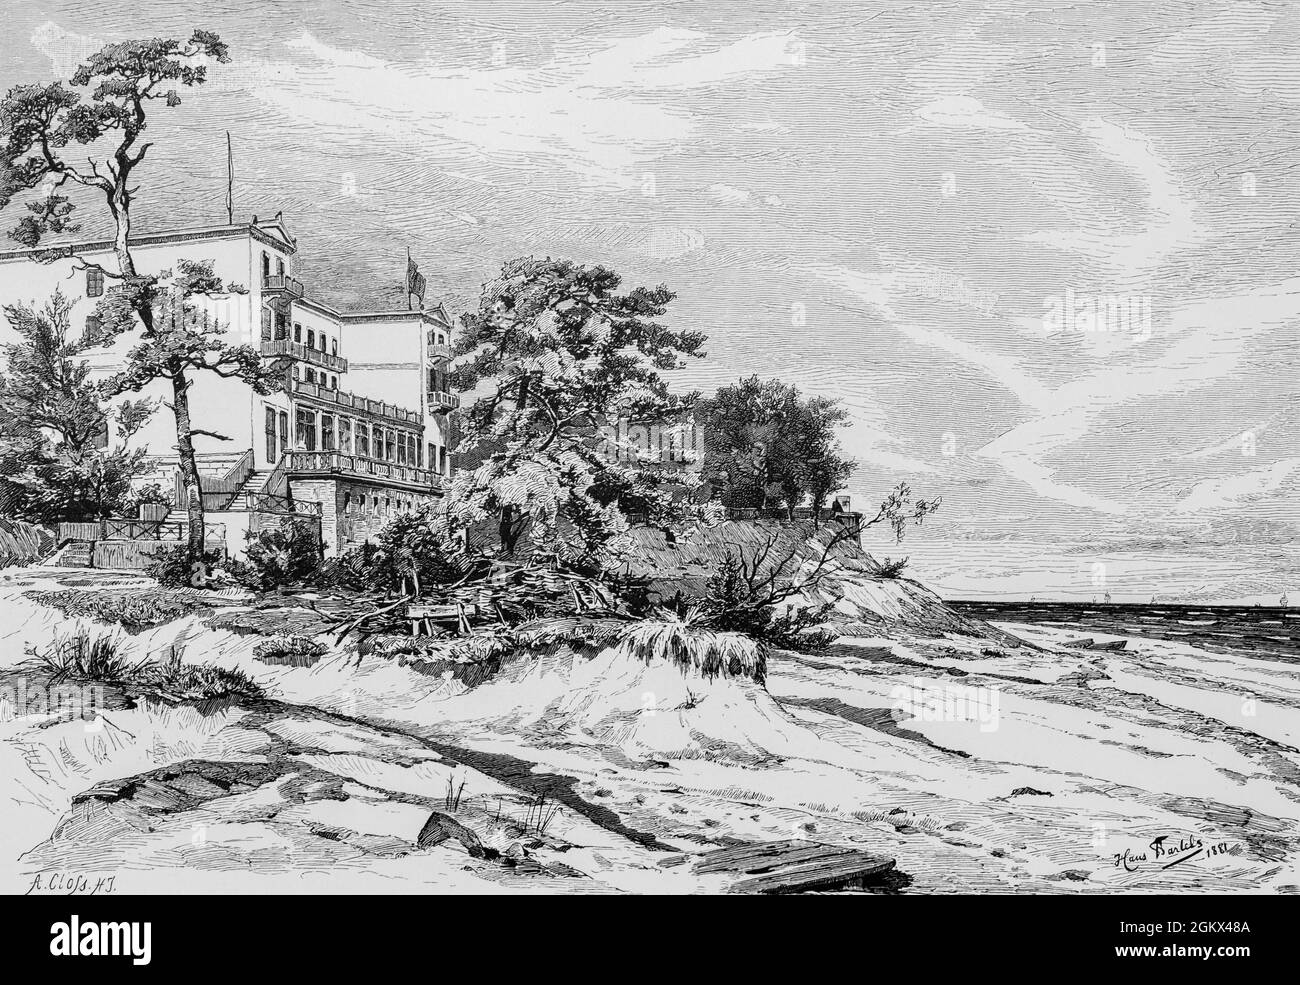 Villa or probably a hotel in Häringsdorf or Herimgsdorf on the Baltic Sea, Mecklenburg-West Pomerania, East Germany, historical illustration 1880, Stock Photo